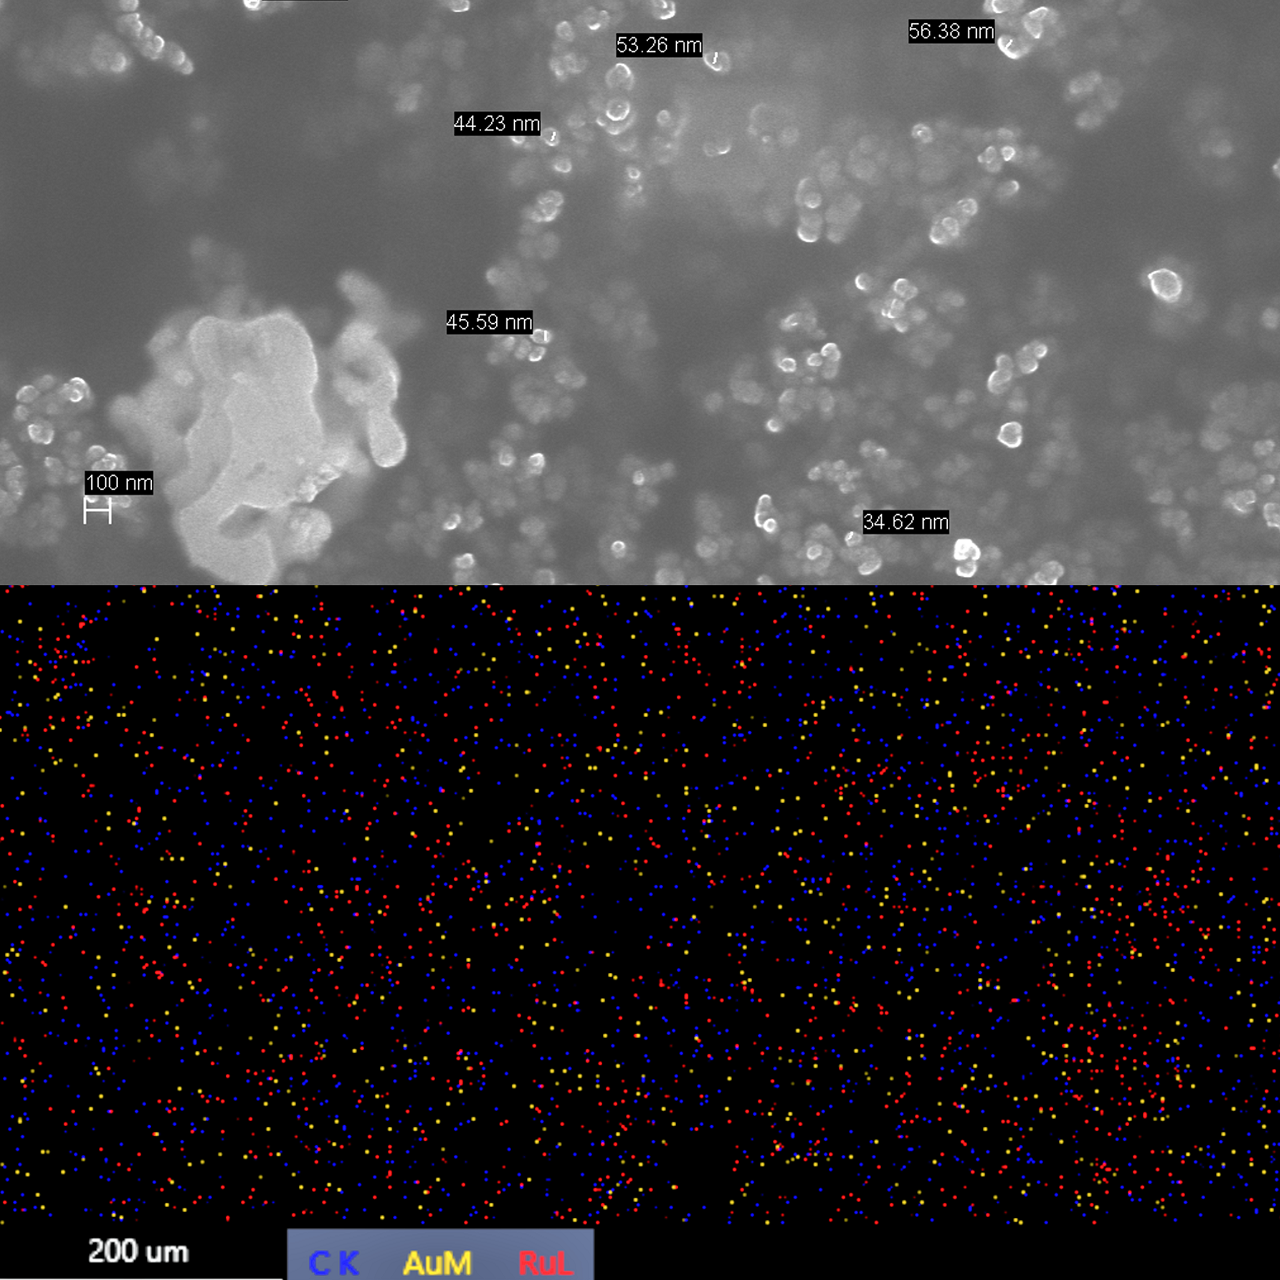 SEM and EDS images of Au-Ru core-shell plasmonic nanoparticles aquired with ZEISS Sigma 300 to obtain precise elemental distribution across nanoparticle samples.